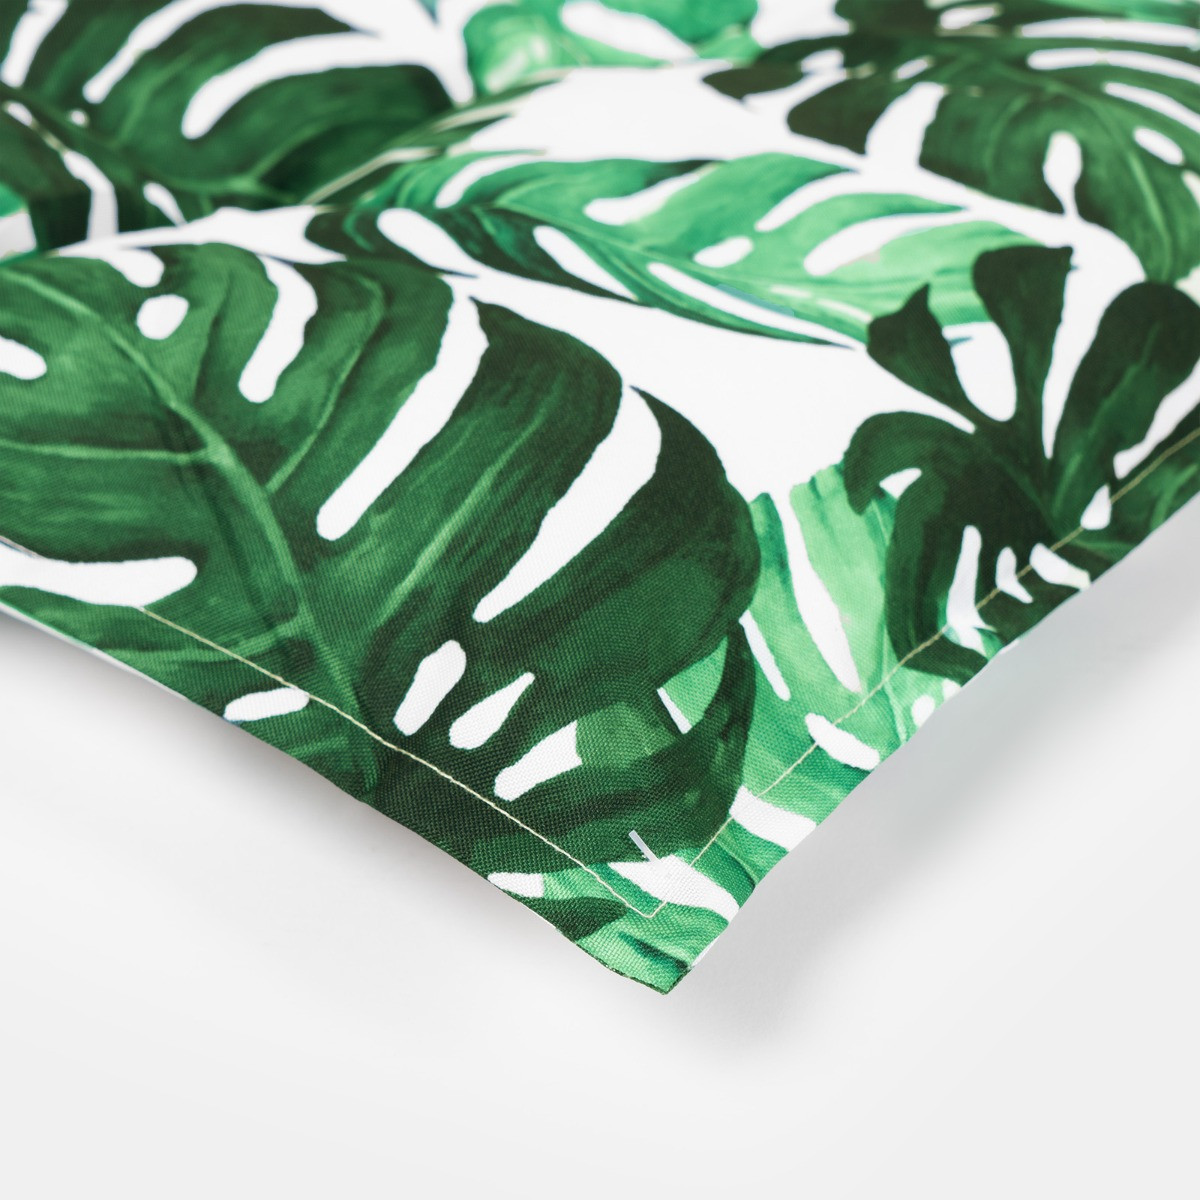 OHS 2 Seater Leaf Print Water Resistant Bench Pad, 110cm x 40cm - Green/White>